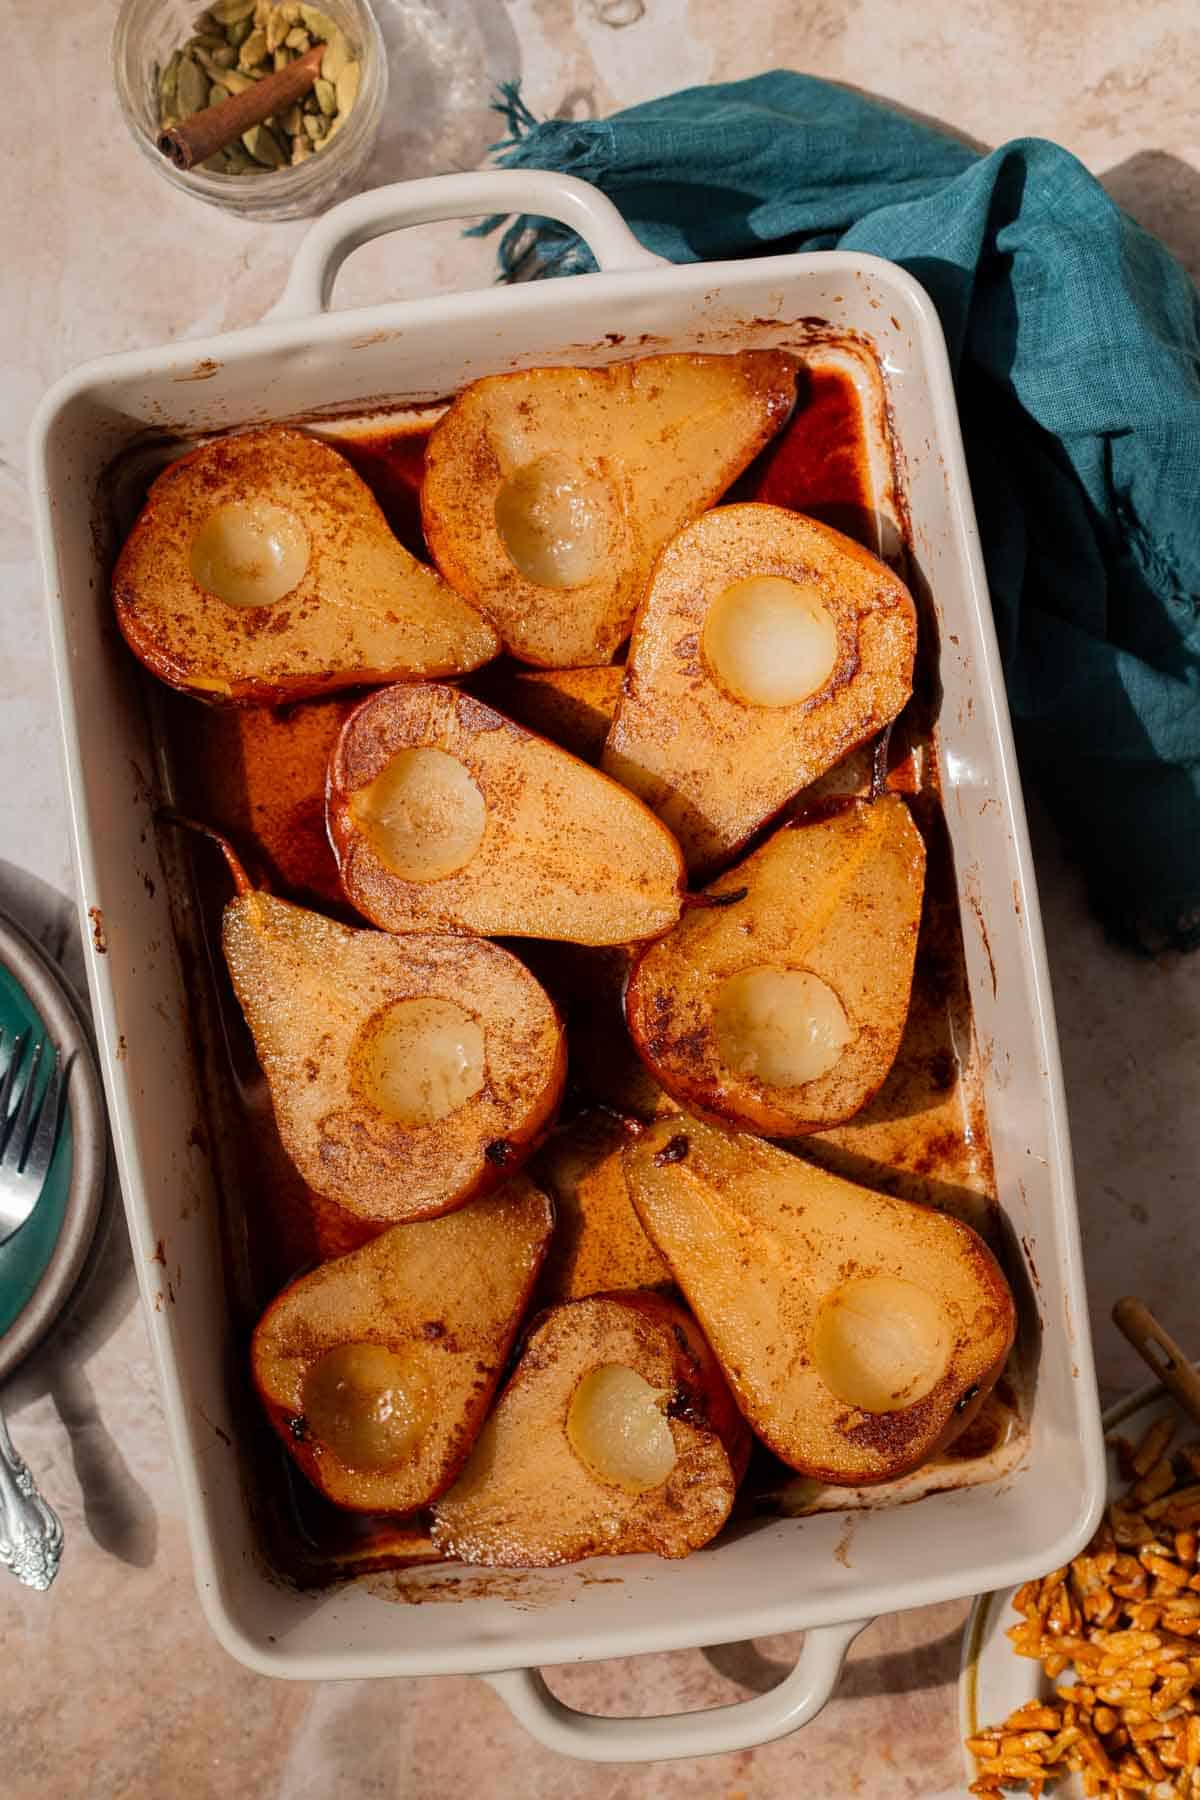 Overhead shot of baked pears in a white baking dish.